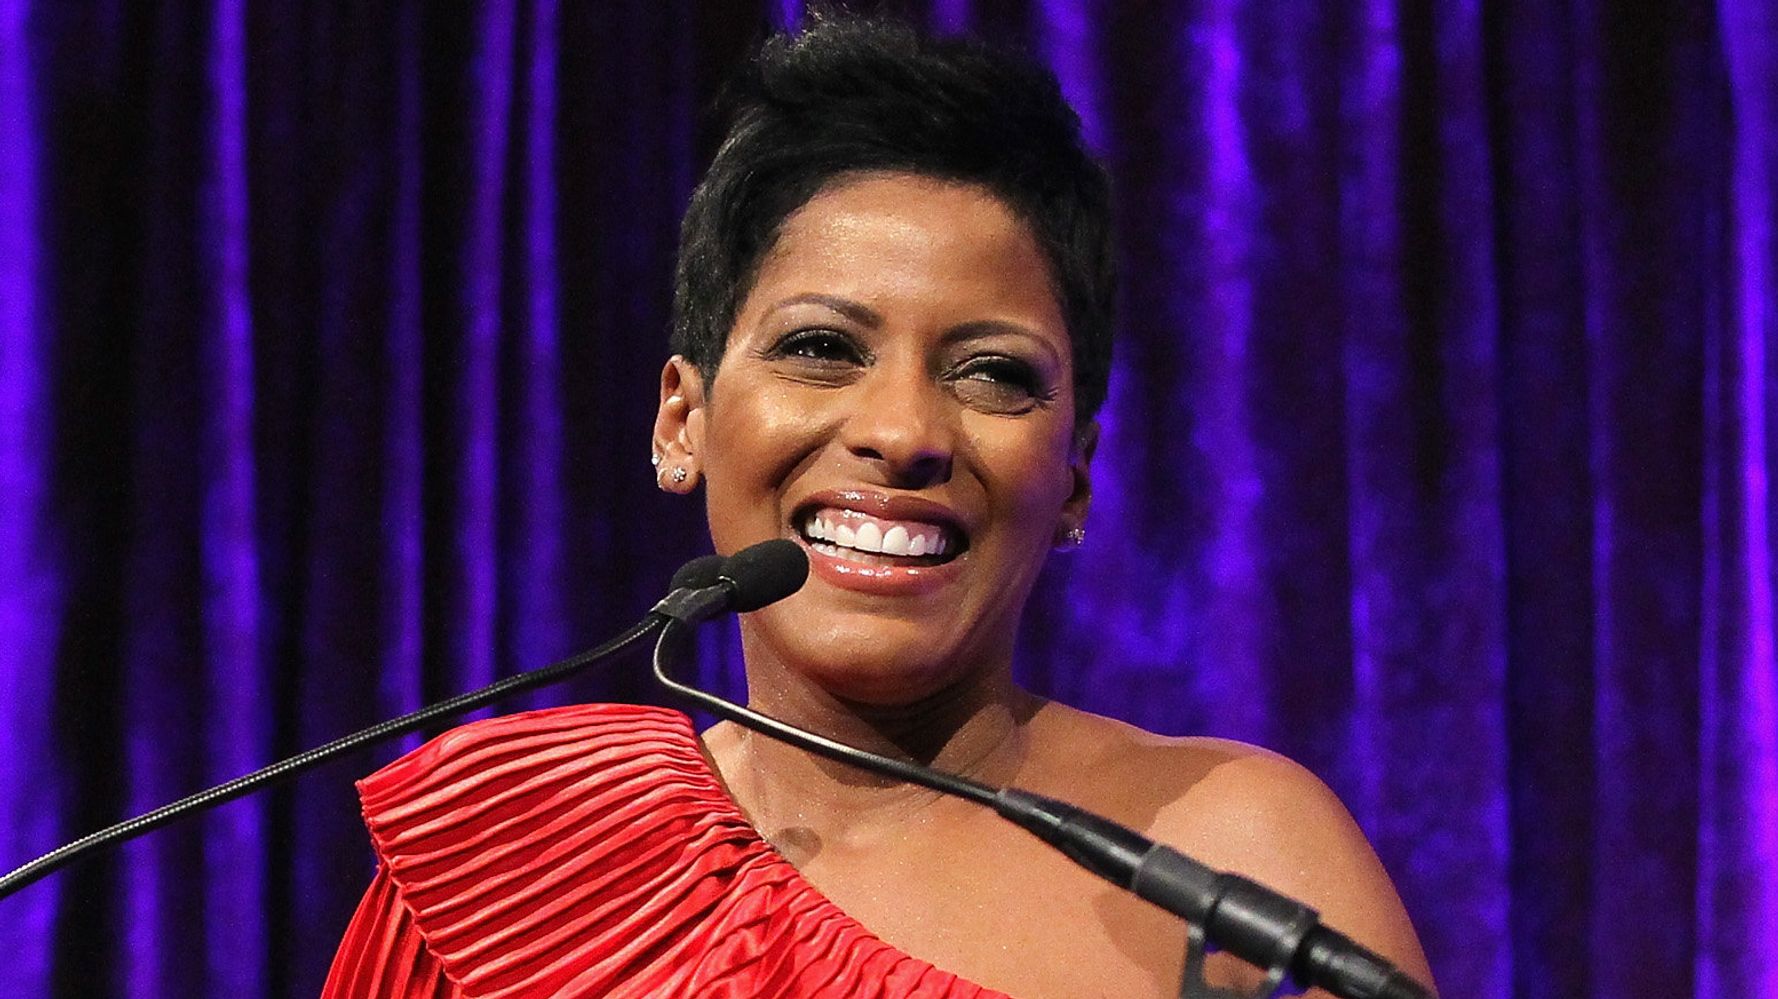 Tamron Hall will reportedly be replaced by Megyn Kelly, who has "a wel...